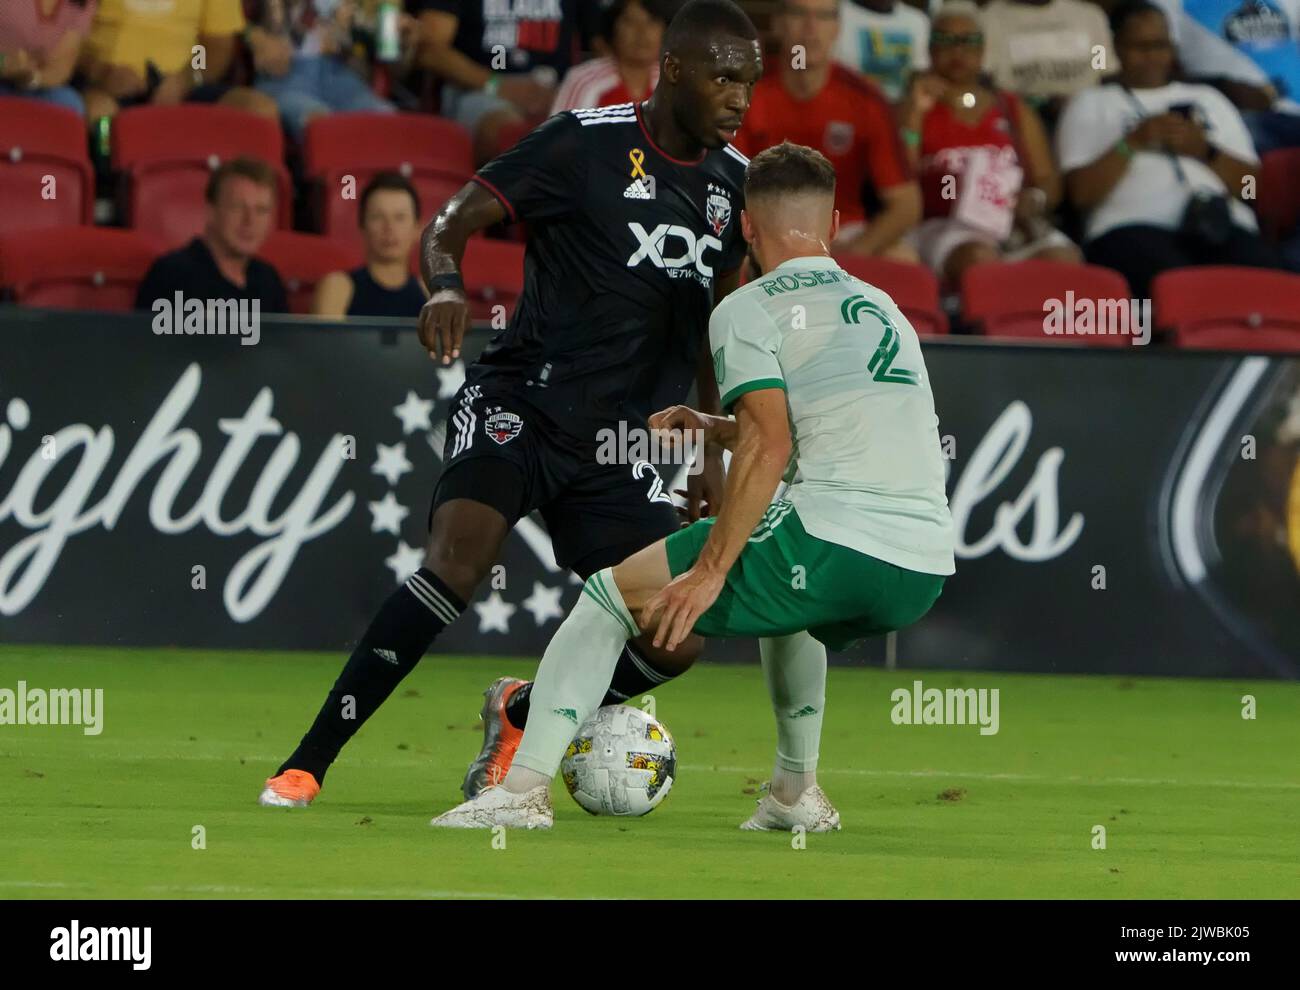 WASHINGTON, DC, USA - 4 SEPTEMBER 2022: Colorado Rapids defender Keegan Rosenberry (2) moves in to defend against D.C. United forward Christian Benteke (20) during a MLS match between D.C United and the Colorado Rapids, on September 04, 2022, at Audi Field, in Washington, DC. (Photo by Tony Quinn-Alamy Live News) Stock Photo